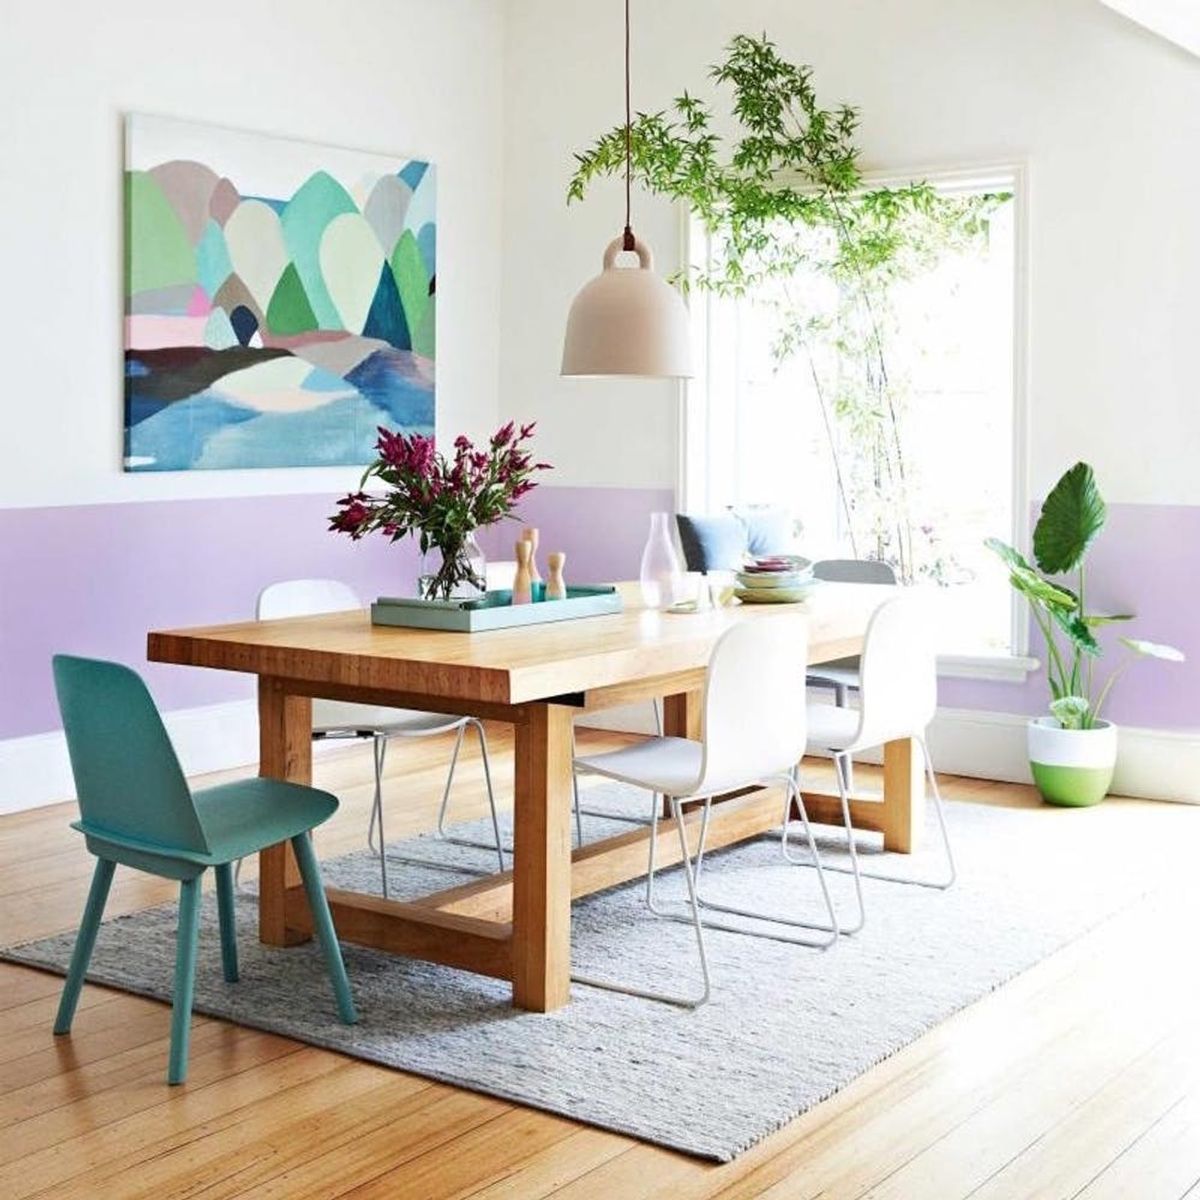 How to Incorporate Pantone’s Verdure Palette into Your Home